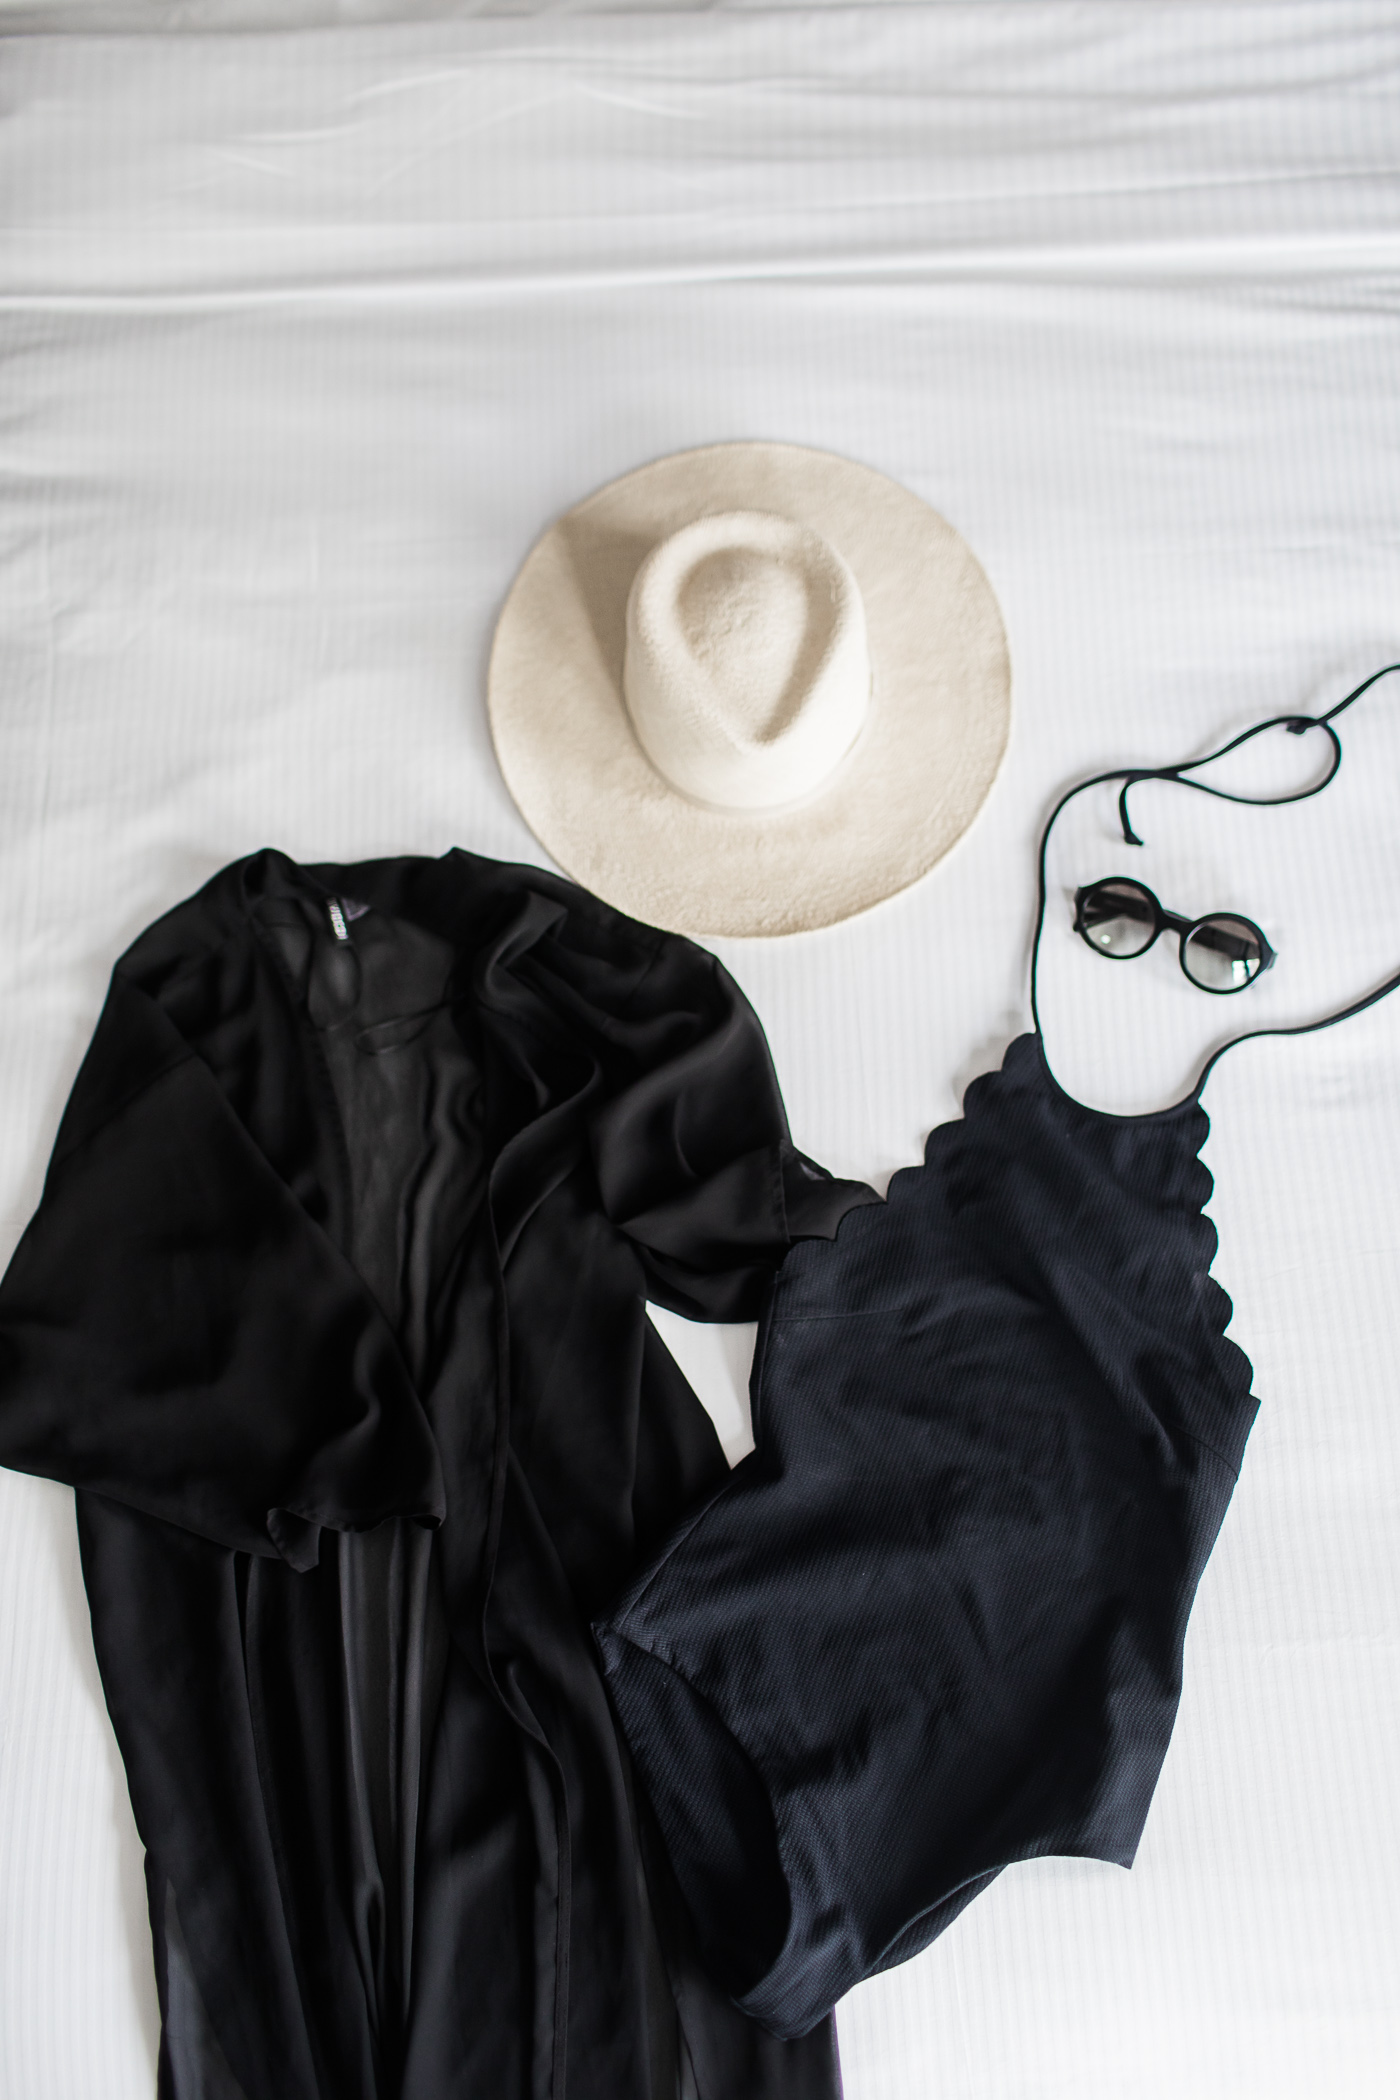 What I wore to San Diego, 5 outfits I packed for a Summer trip to San Diego in a carry-on.